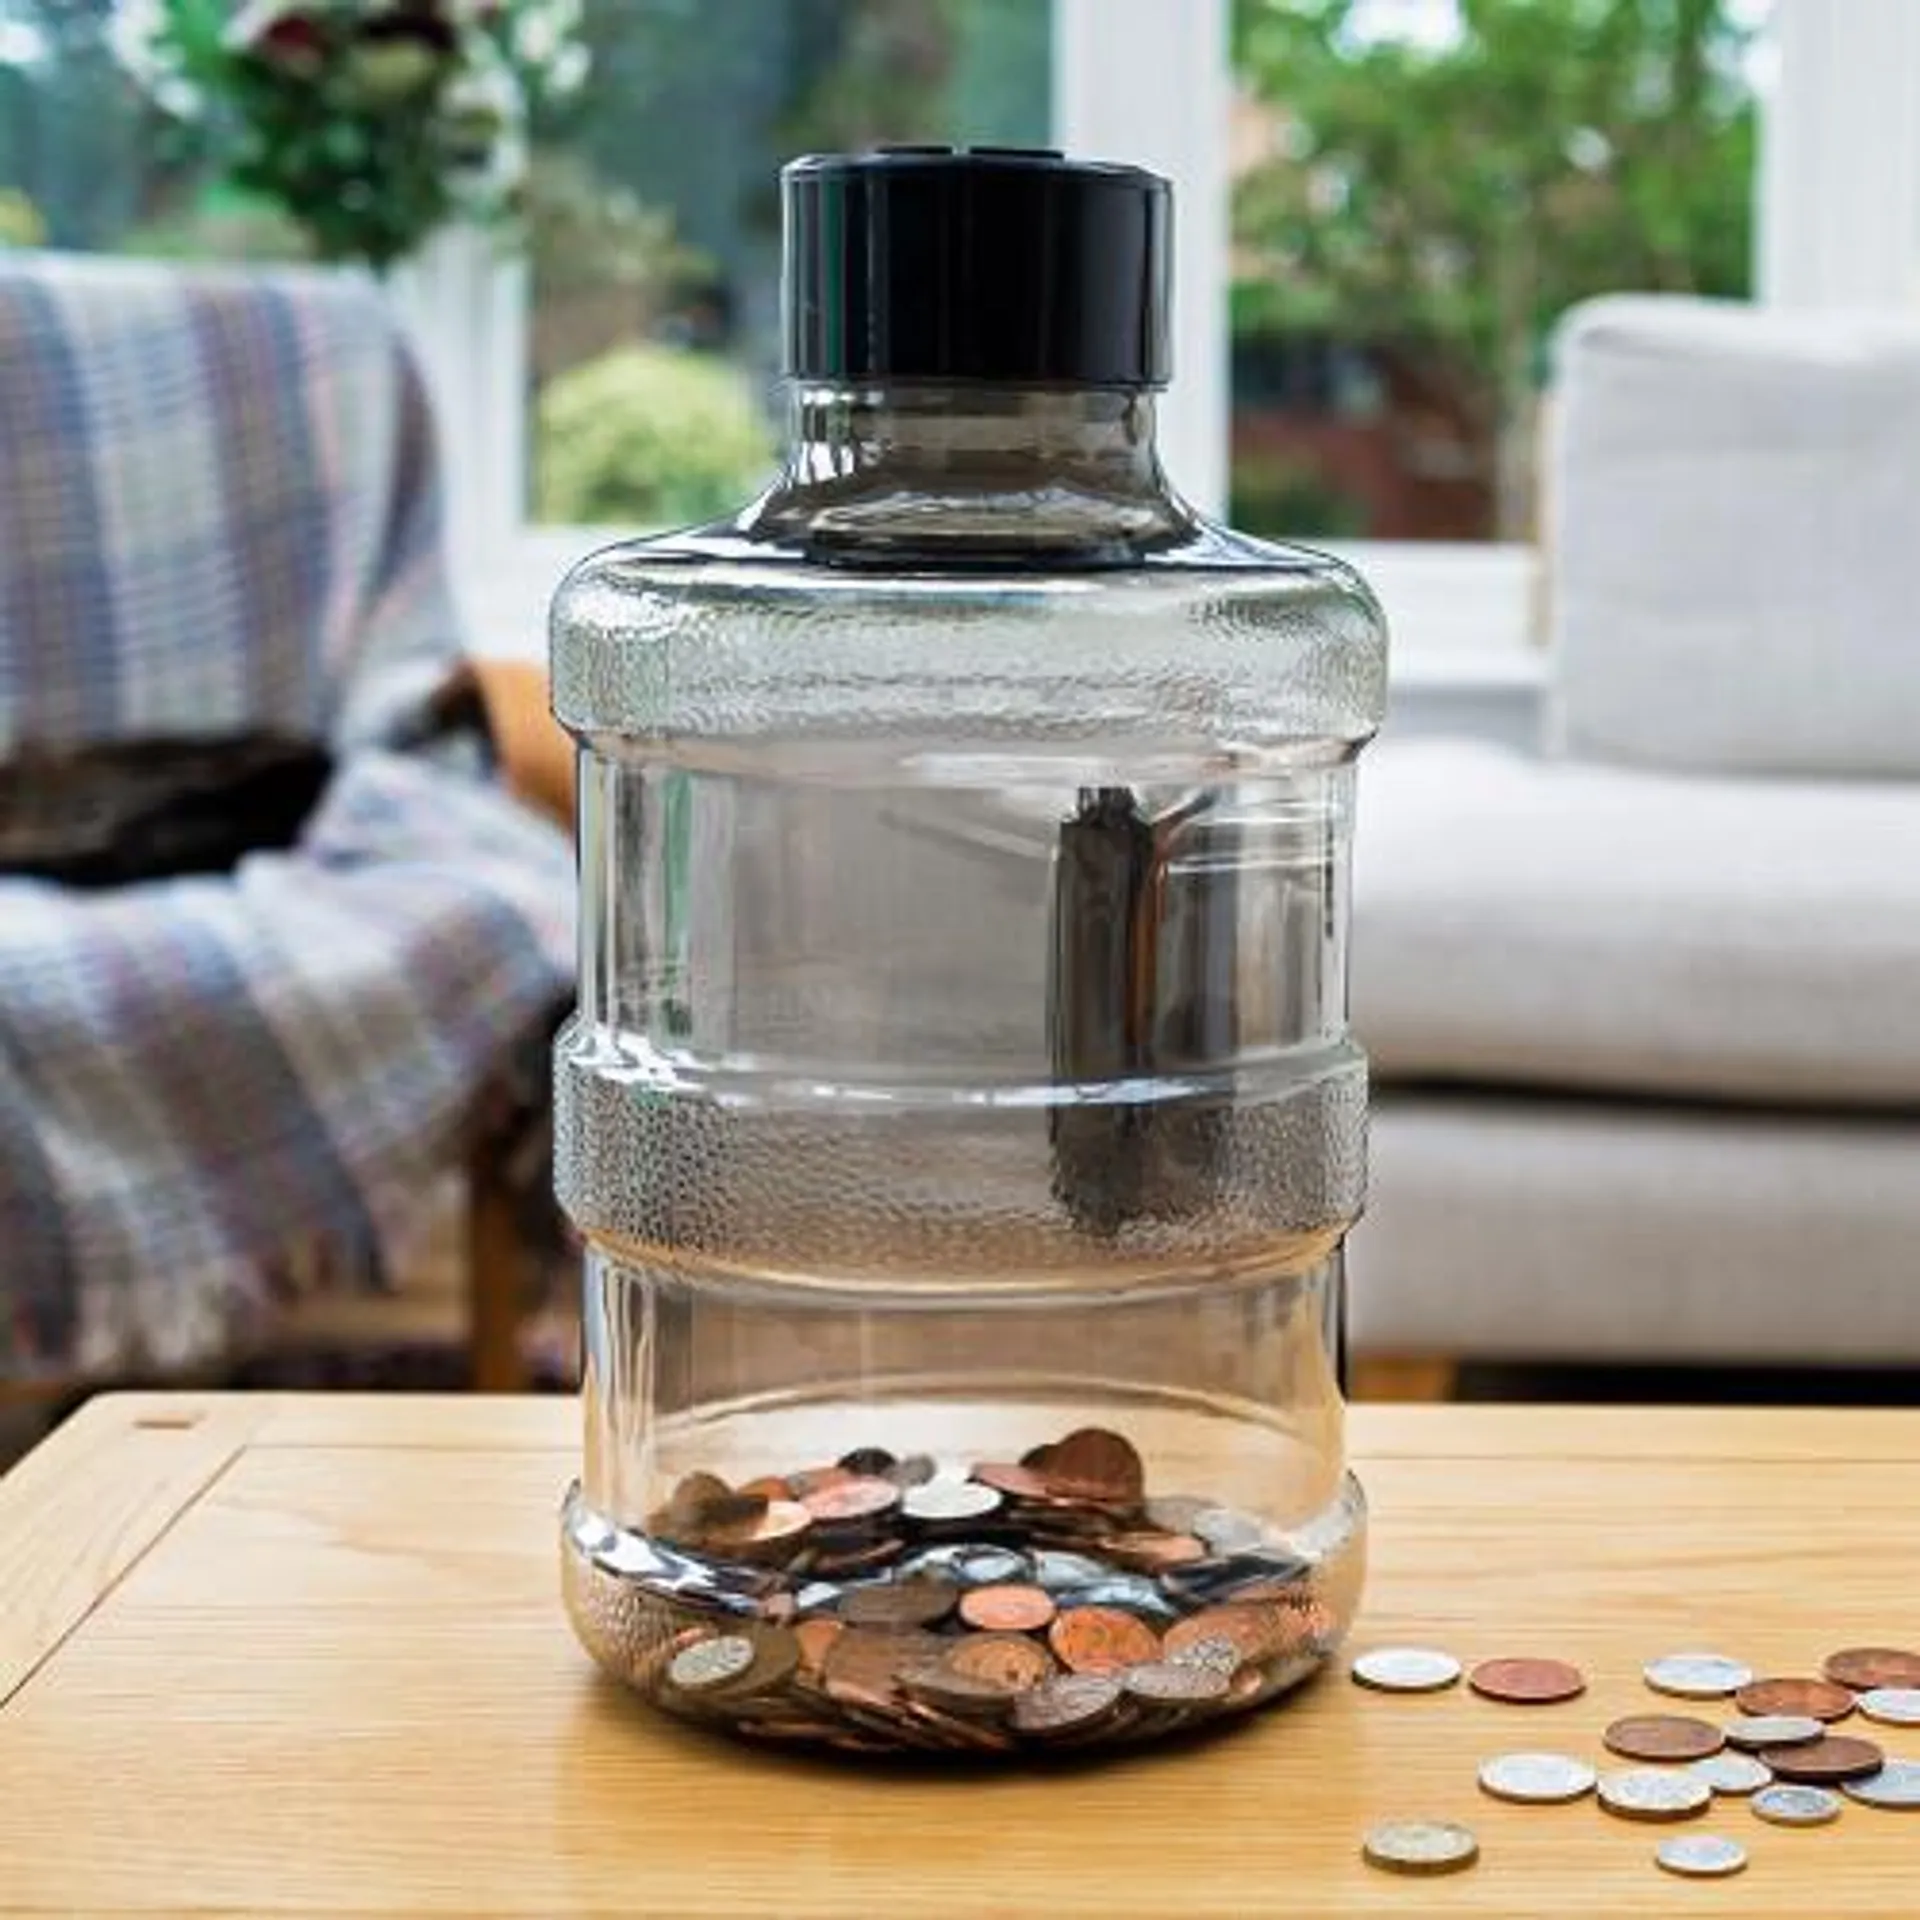 Super Size Coin Counting Jar